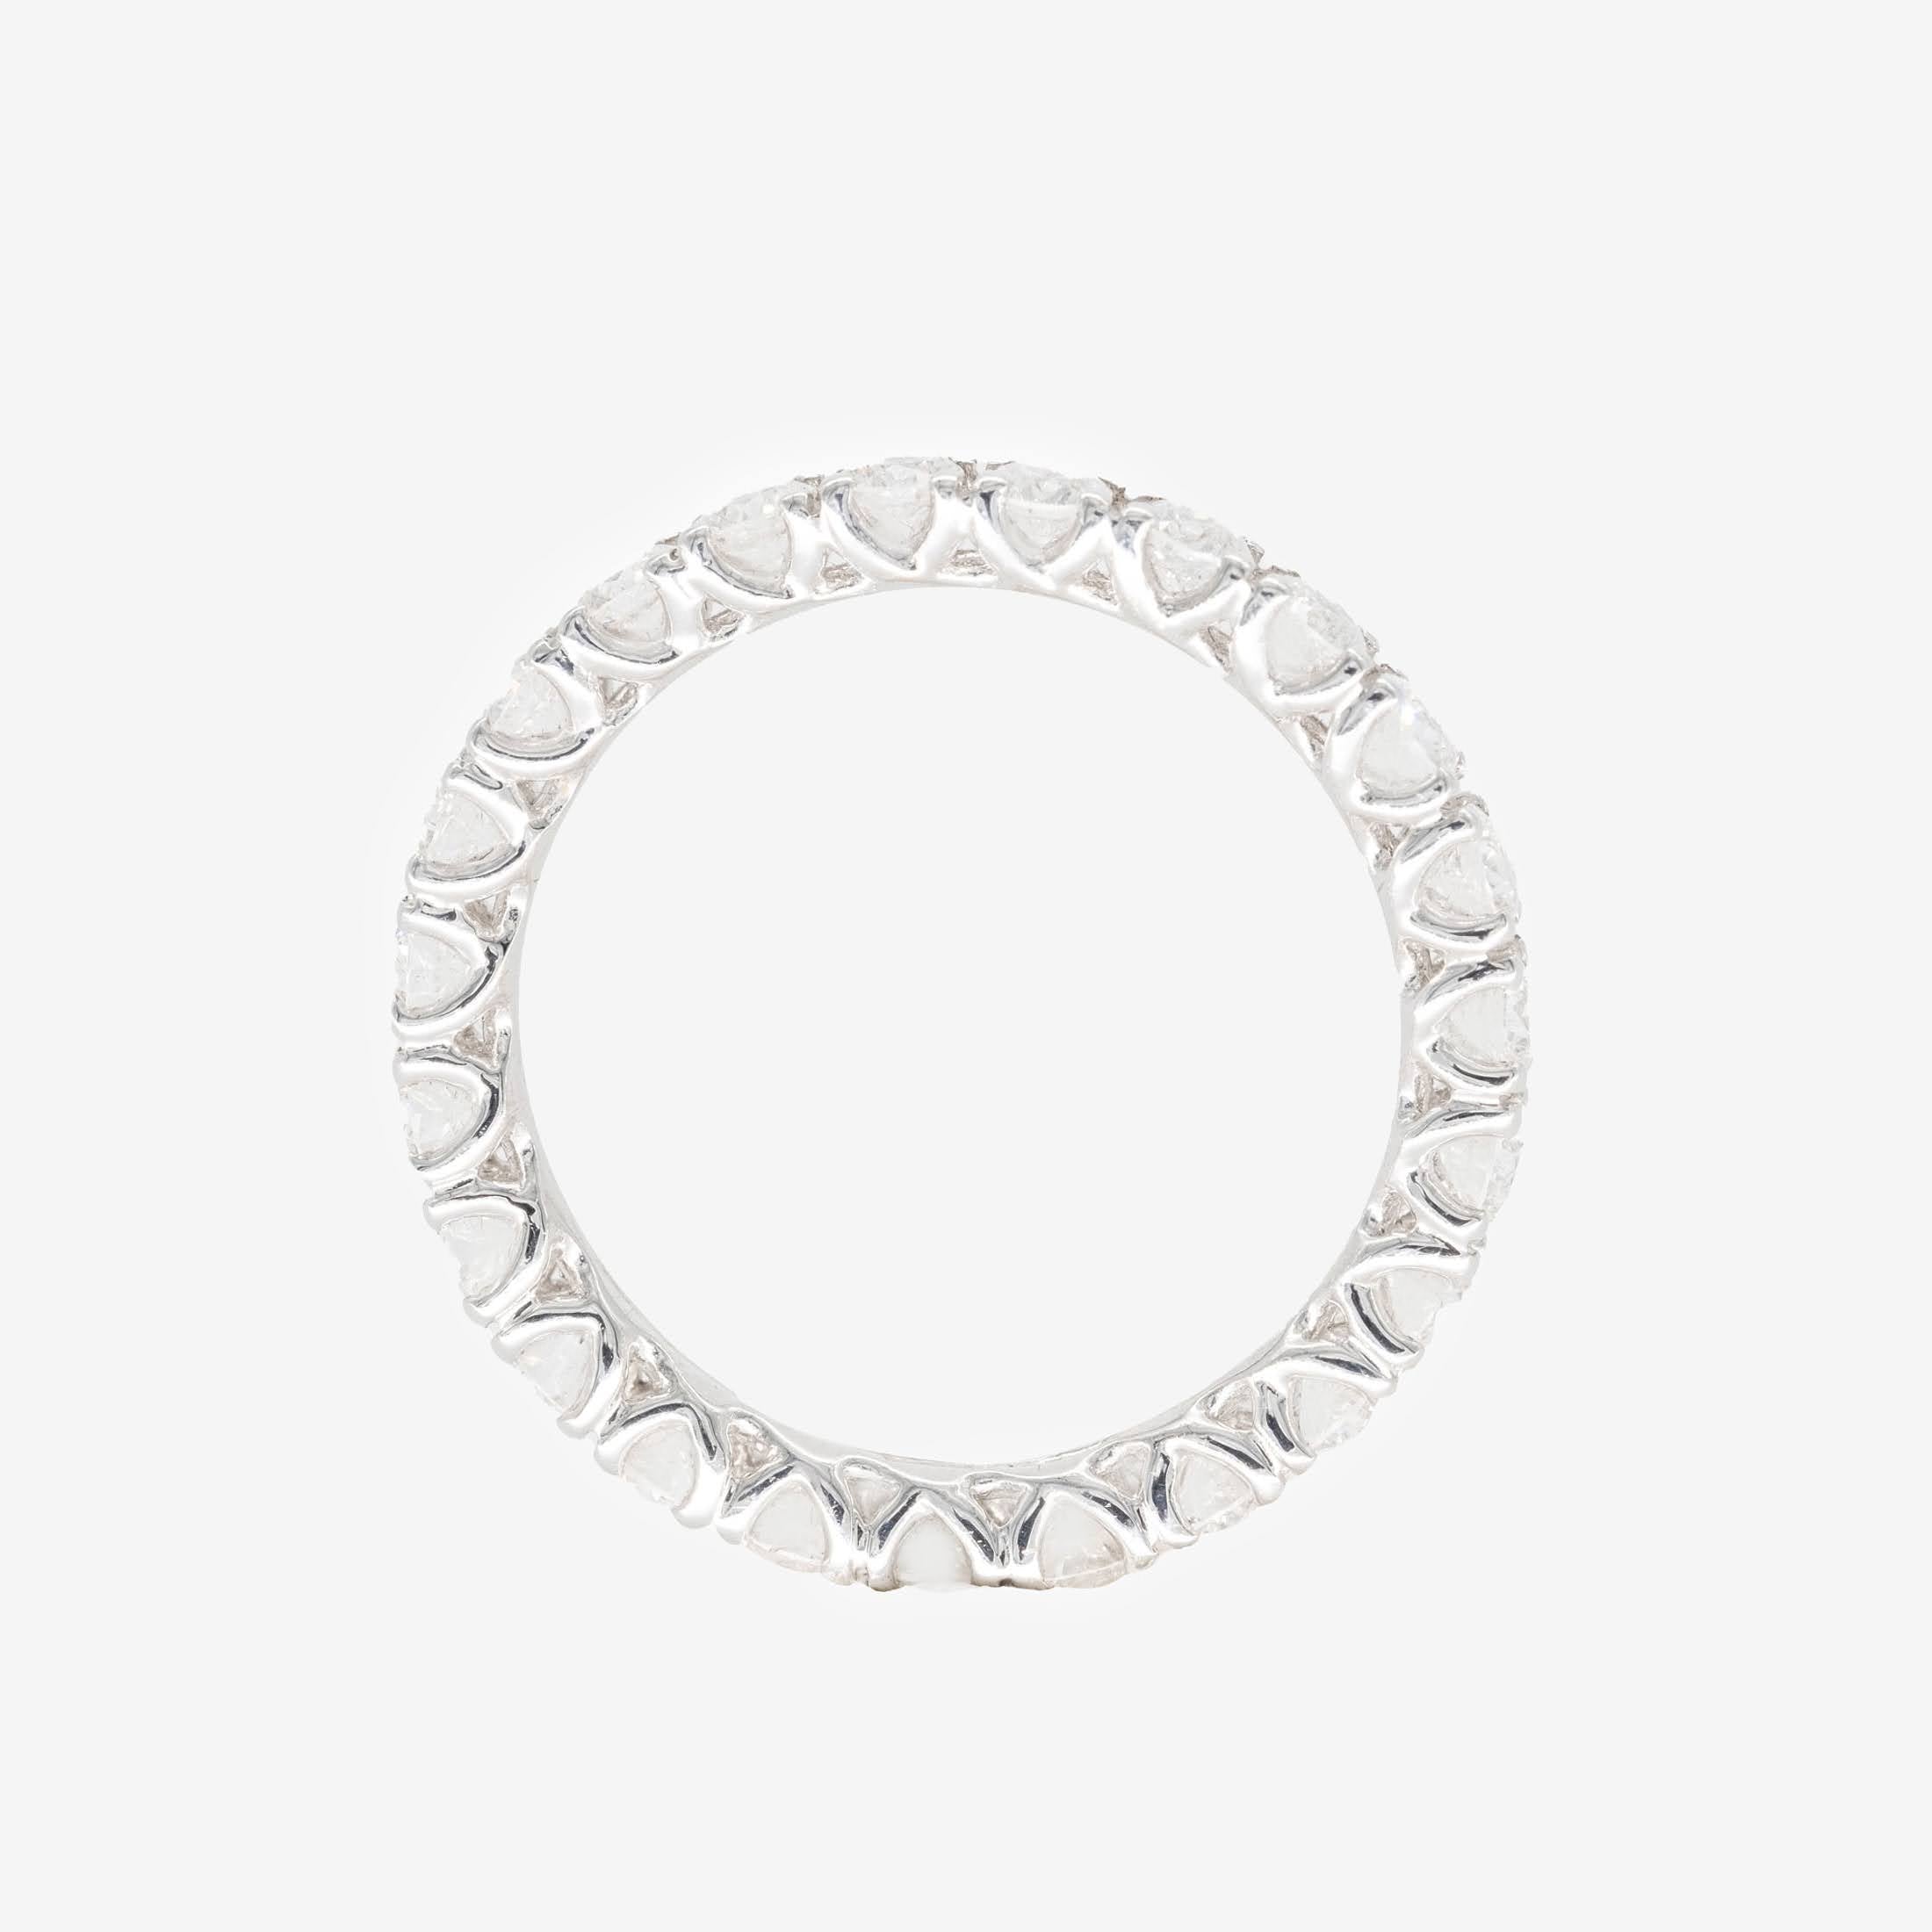 White Gold Eternity Ring with White Diamonds 2ct